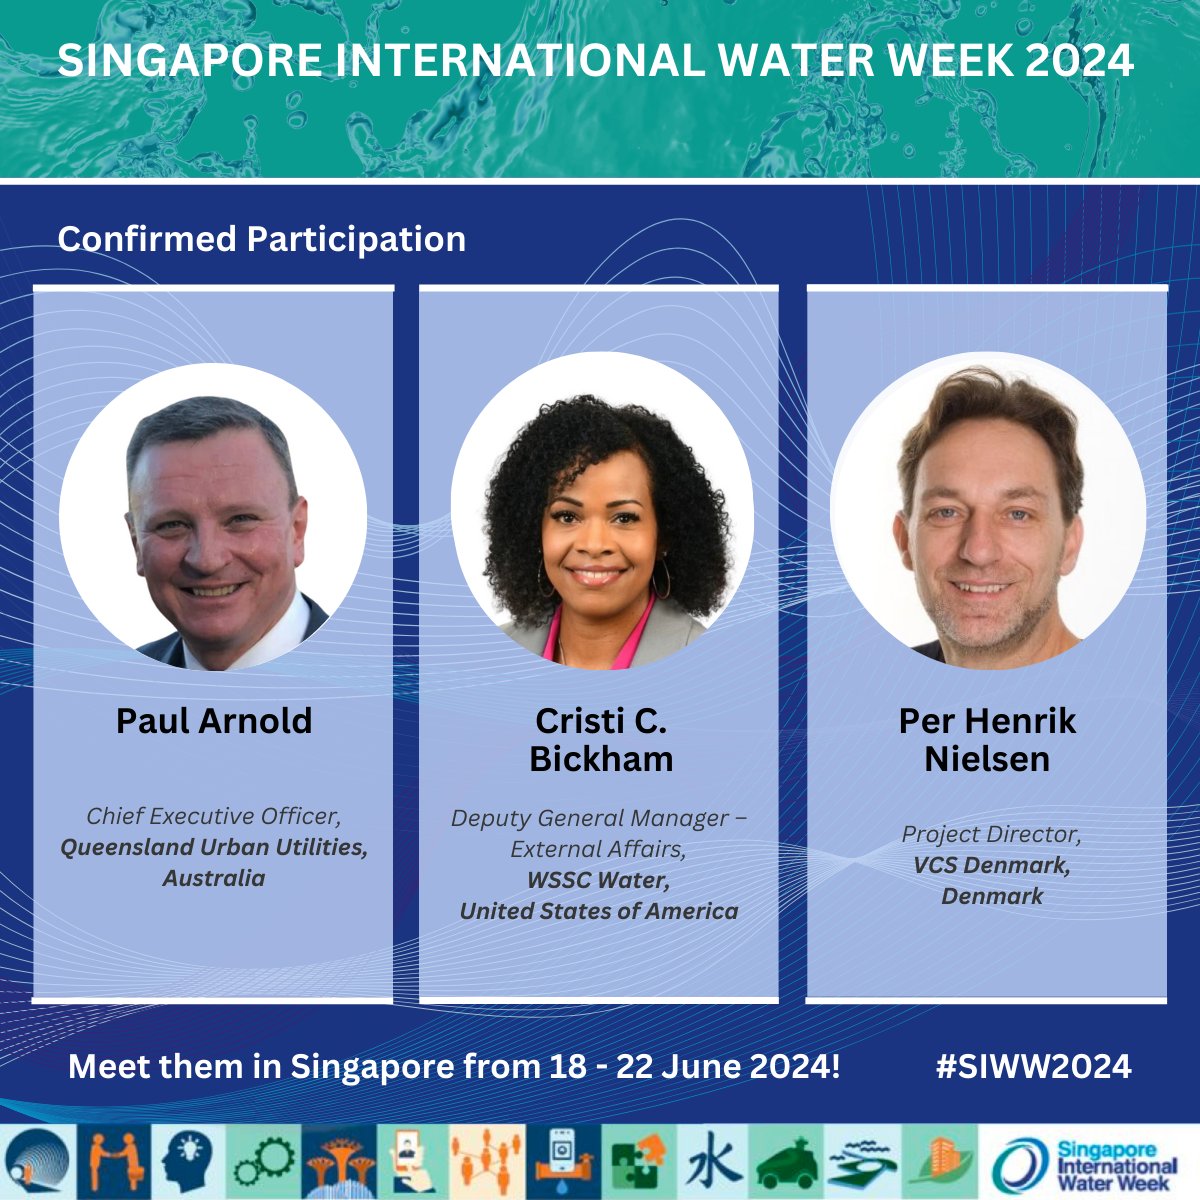 We are delighted to announce the confirmed participation of 3 more global leaders at #SIWW2024! See who else is coming: lnkd.in/g8vyyARG Register for SIWW2024 now! lnkd.in/gfhtXBCm